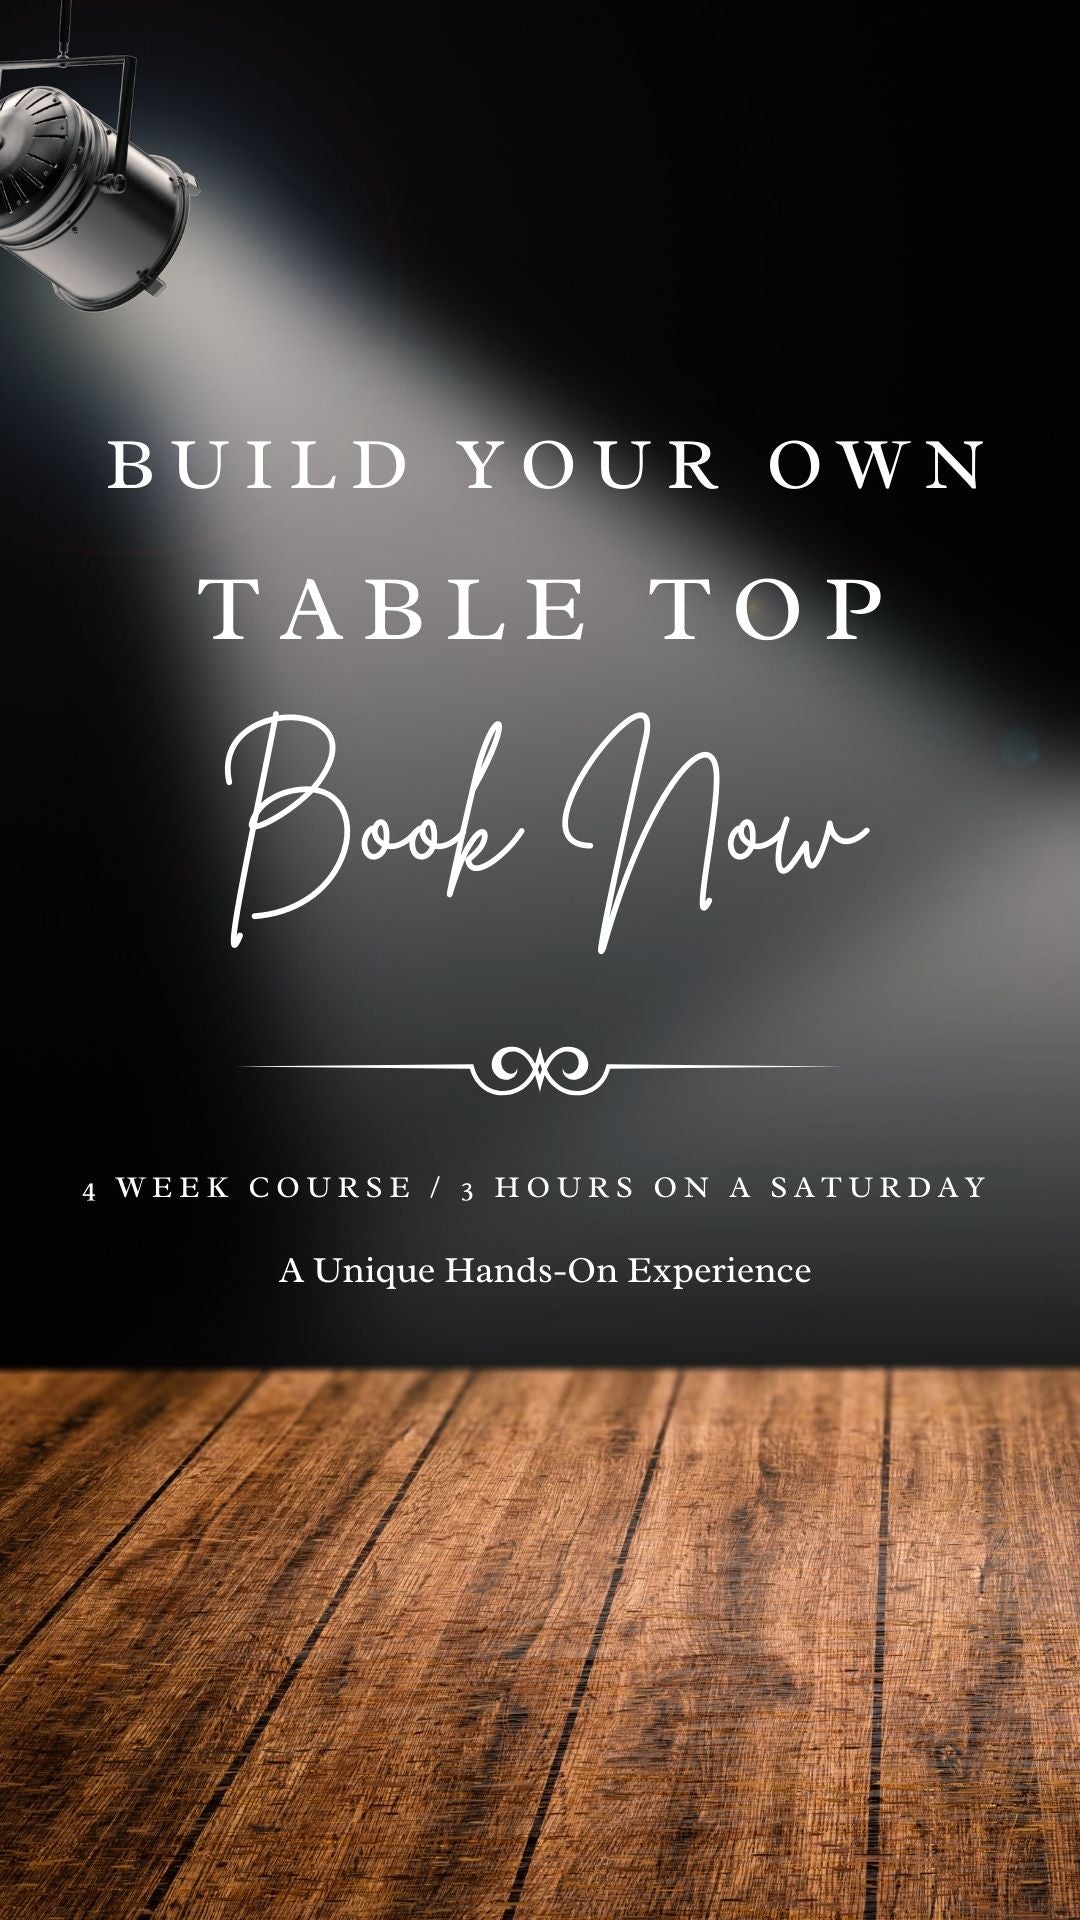 Build Your Own Table Top 12 Hour Course over 4 Days